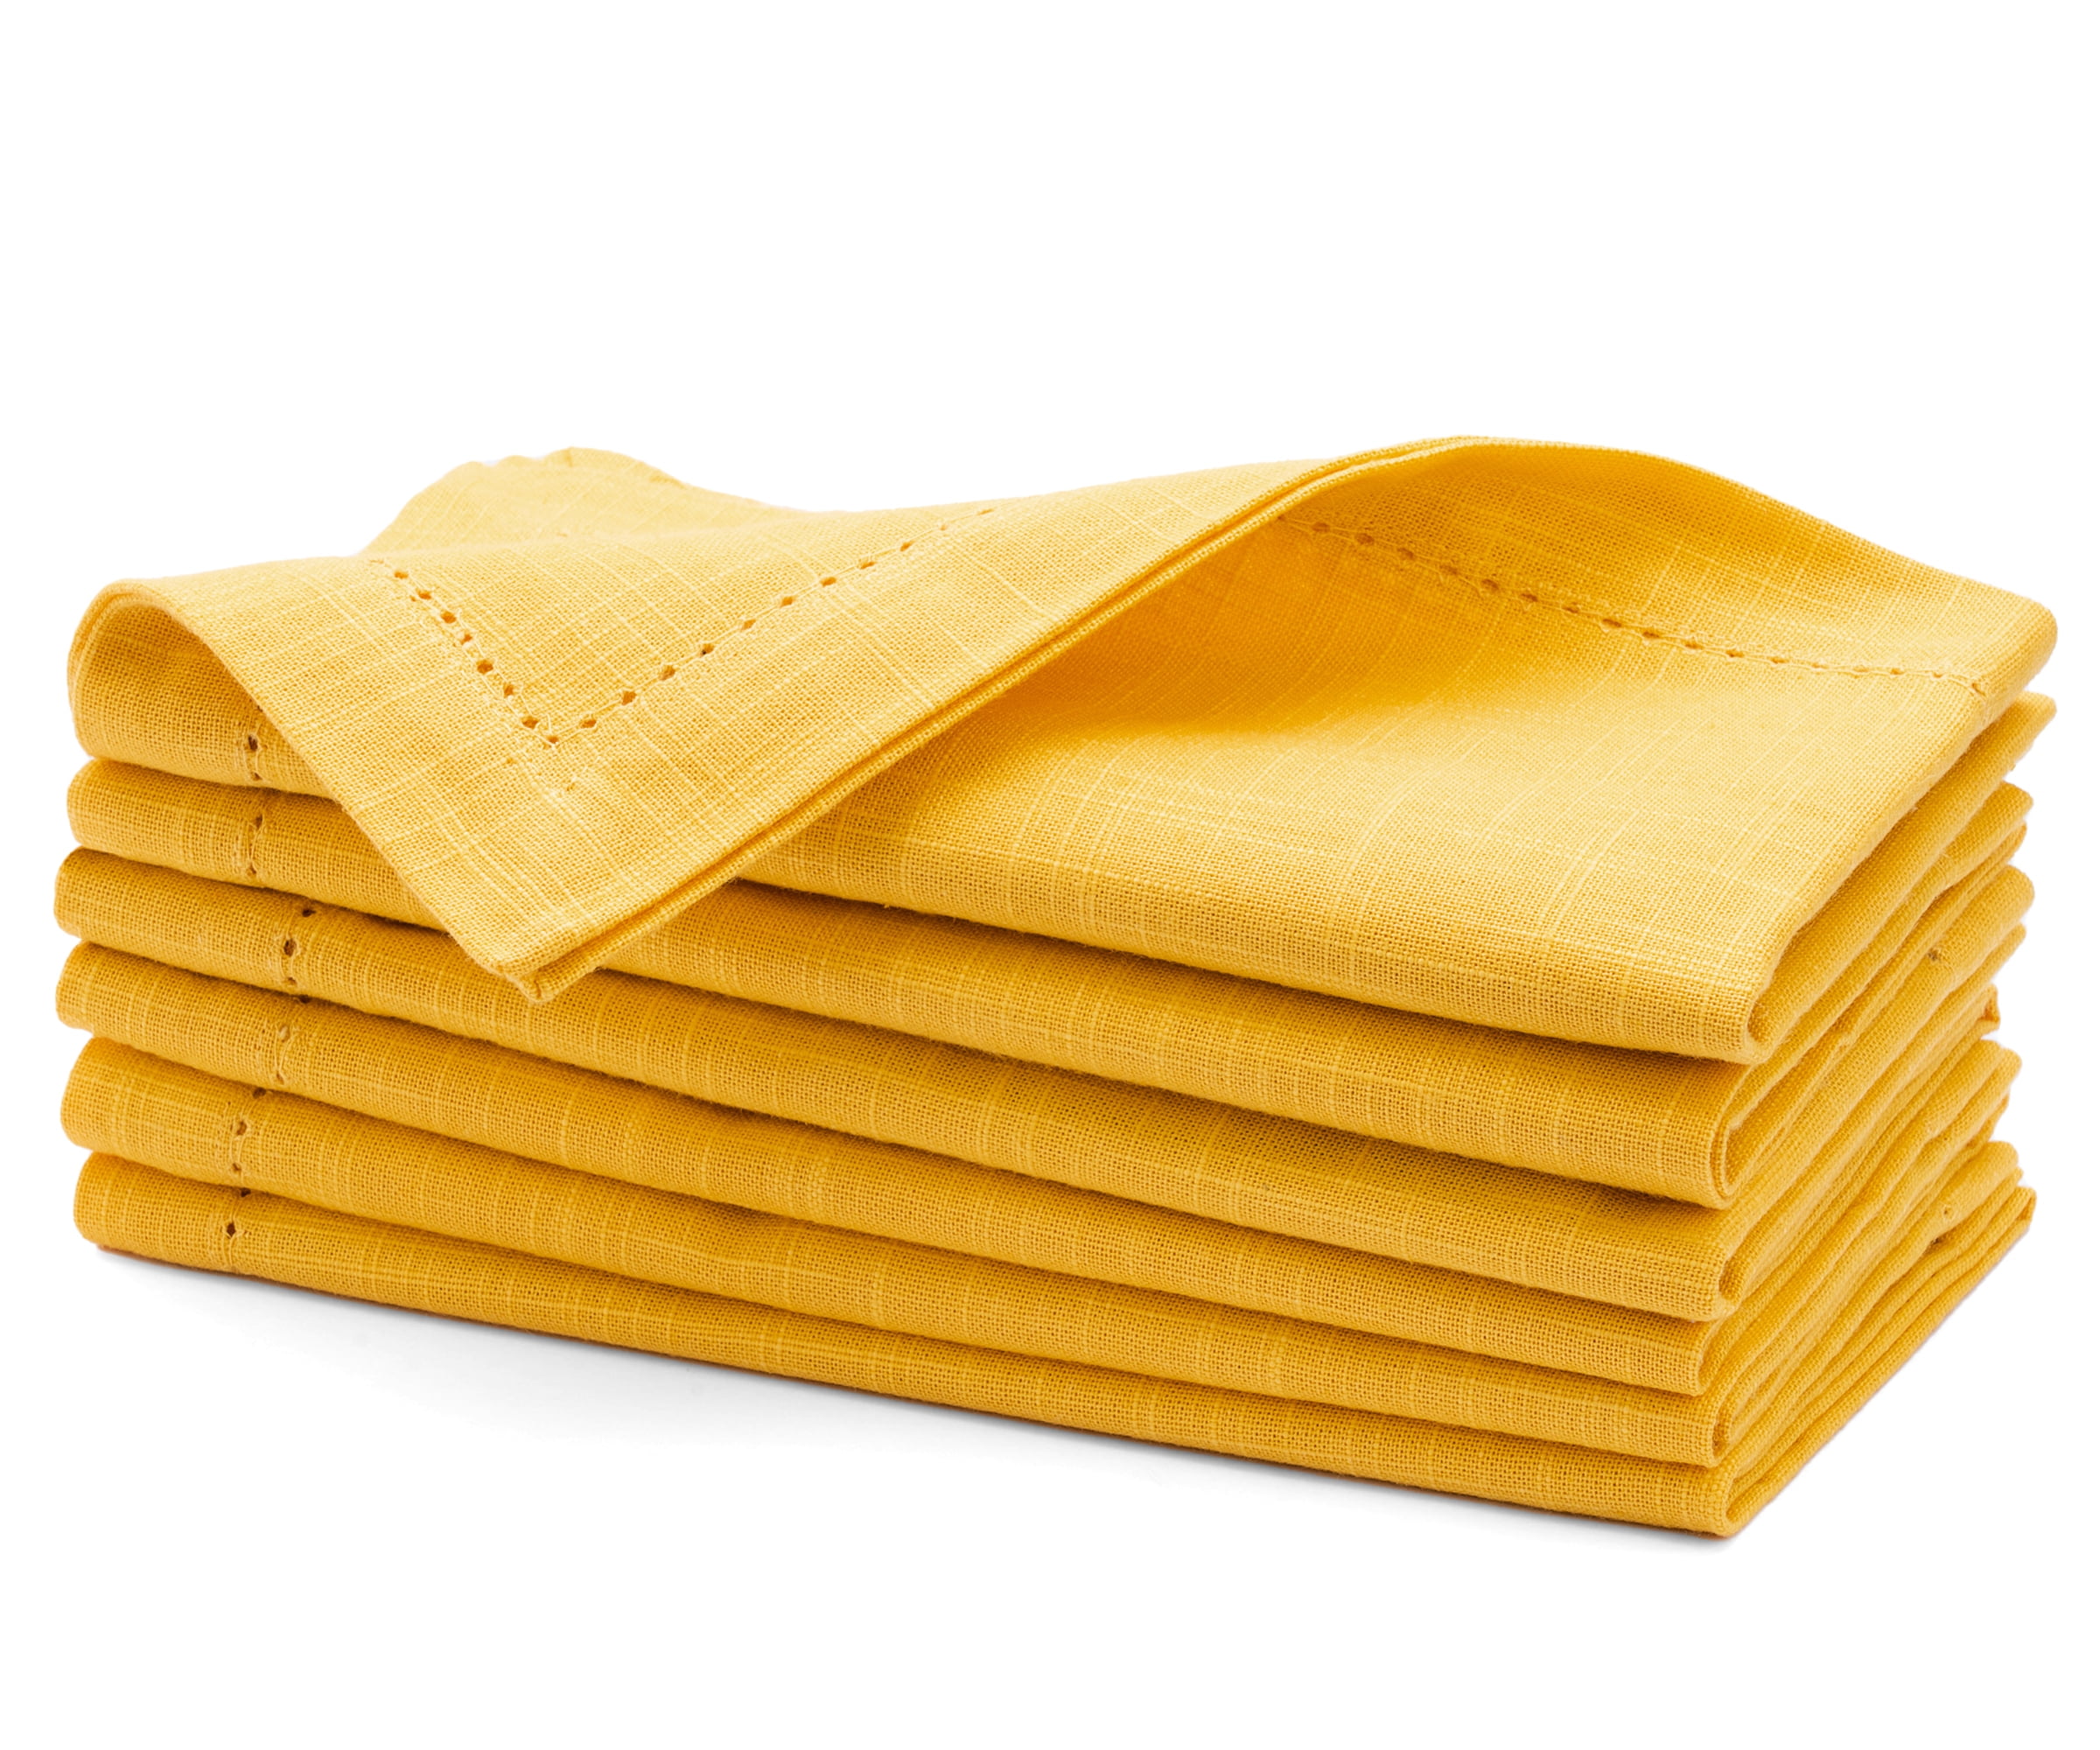 All Cotton and Linen Cloth Napkins, Cotton Dinner Napkins, Hemstitched Napkins  Cloth Washable, Yellow Linen Napkins, Set of 6, 18 x 18, Yellow 